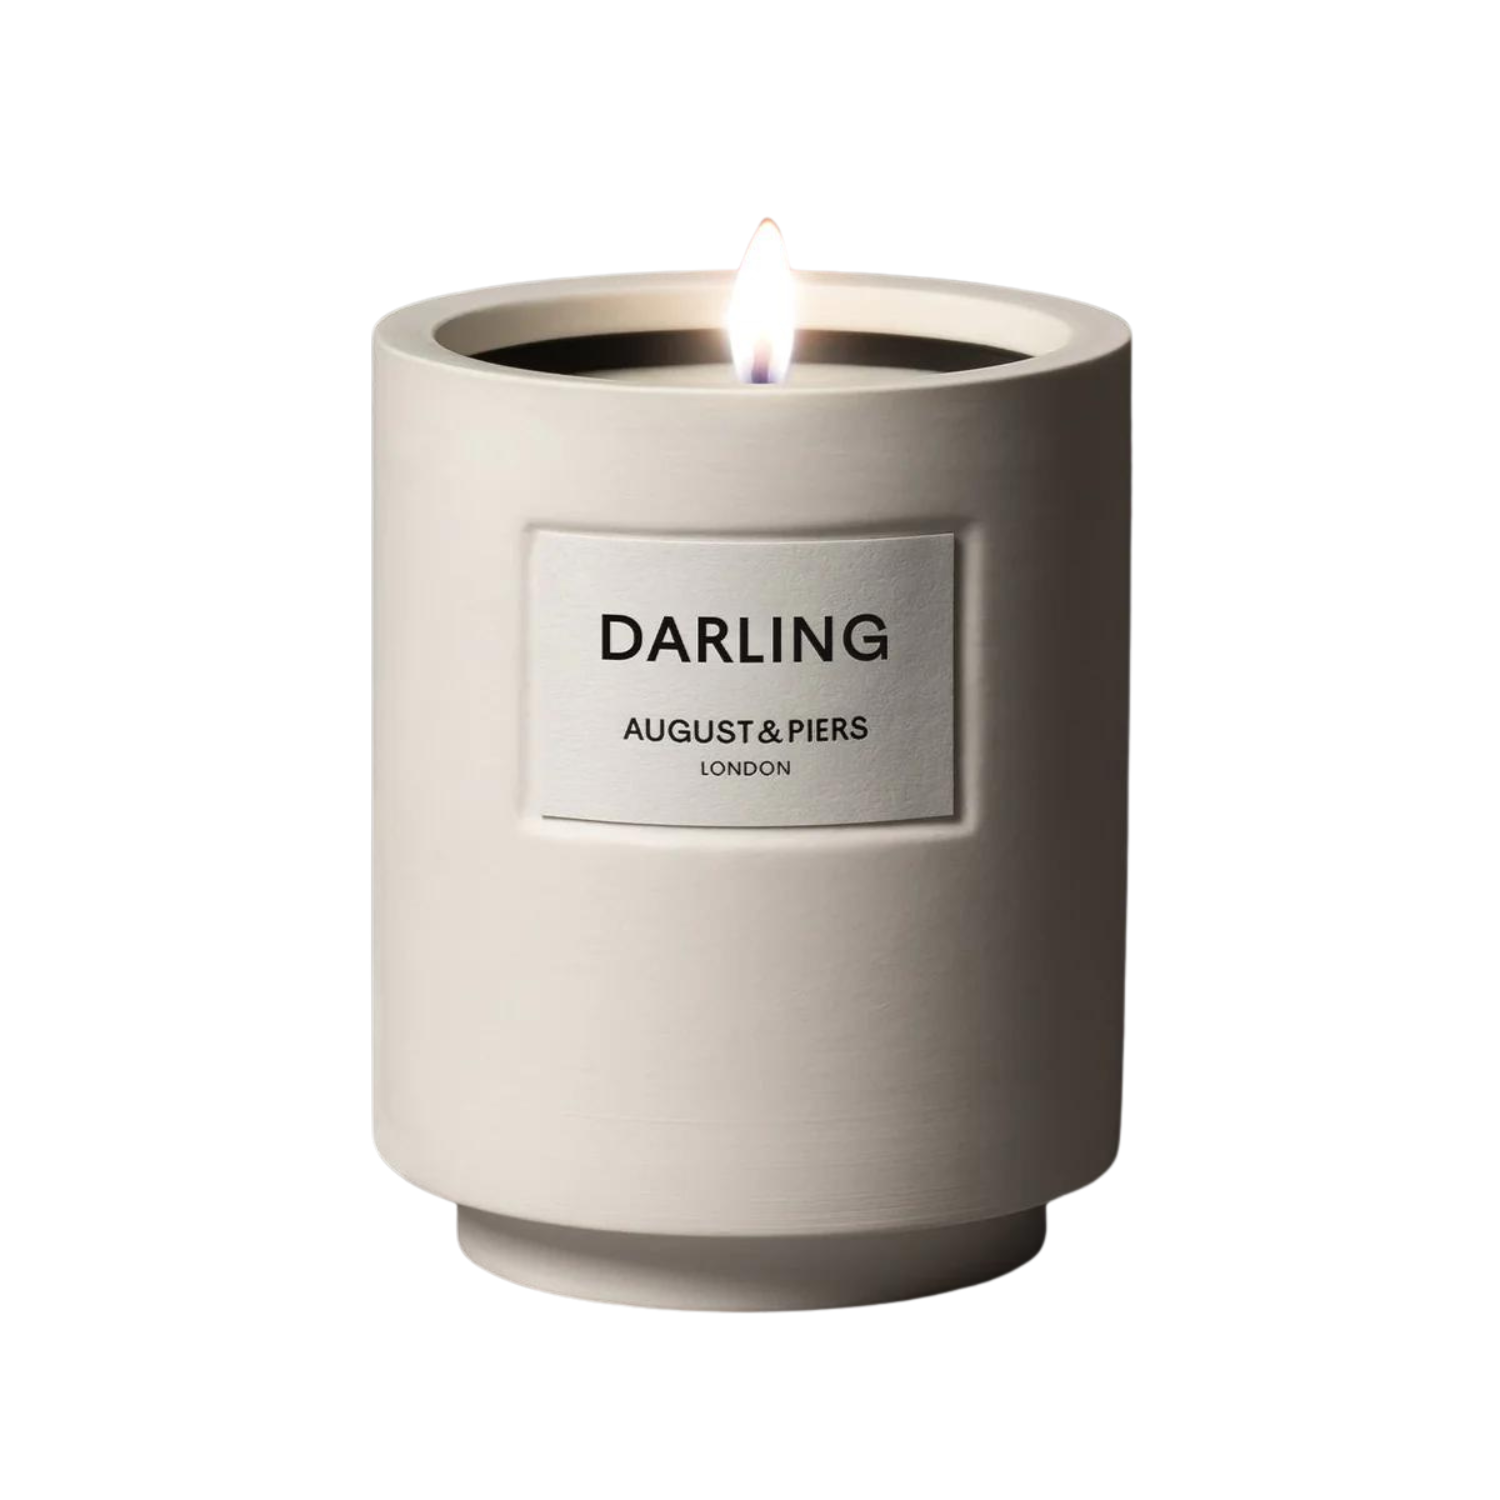 August & Piers Darling Candle